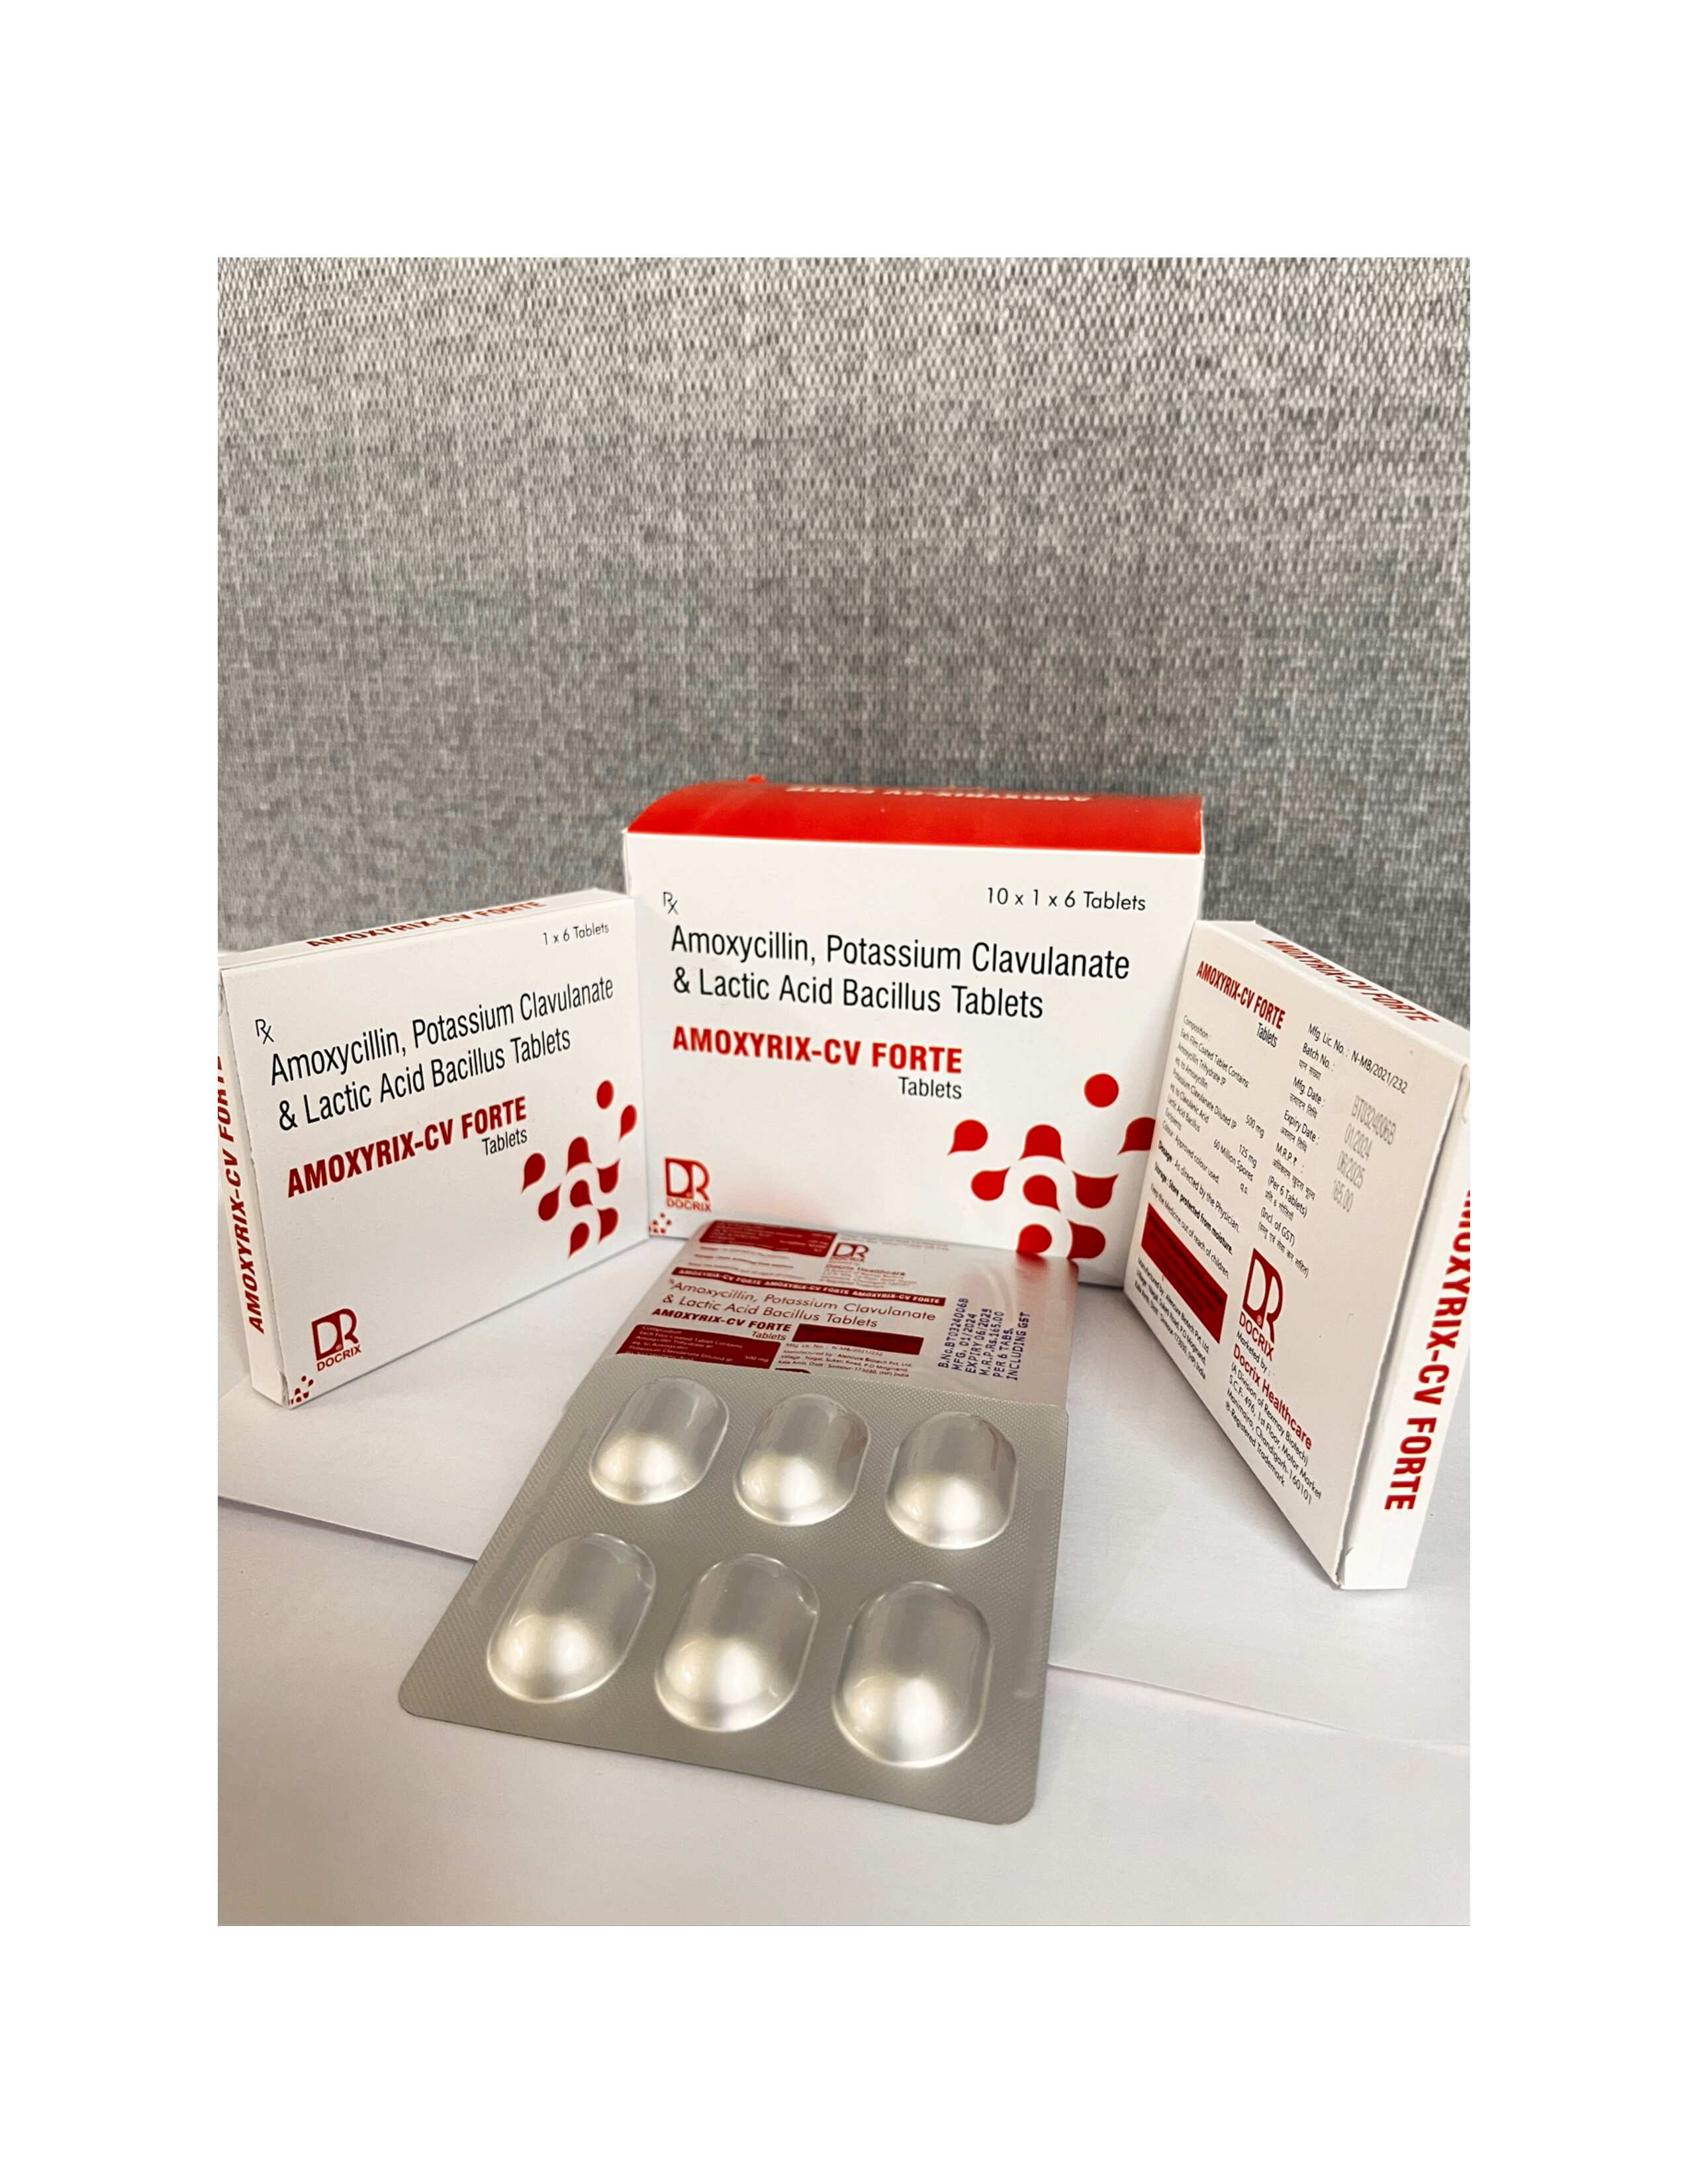 Product Name: Amoxyrix CV Forte, Compositions of Amoxyrix CV Forte are Amoxycilin & Potassium Clavulanate & Lactic Acid bacillus Tablets  - Docrix Healthcare